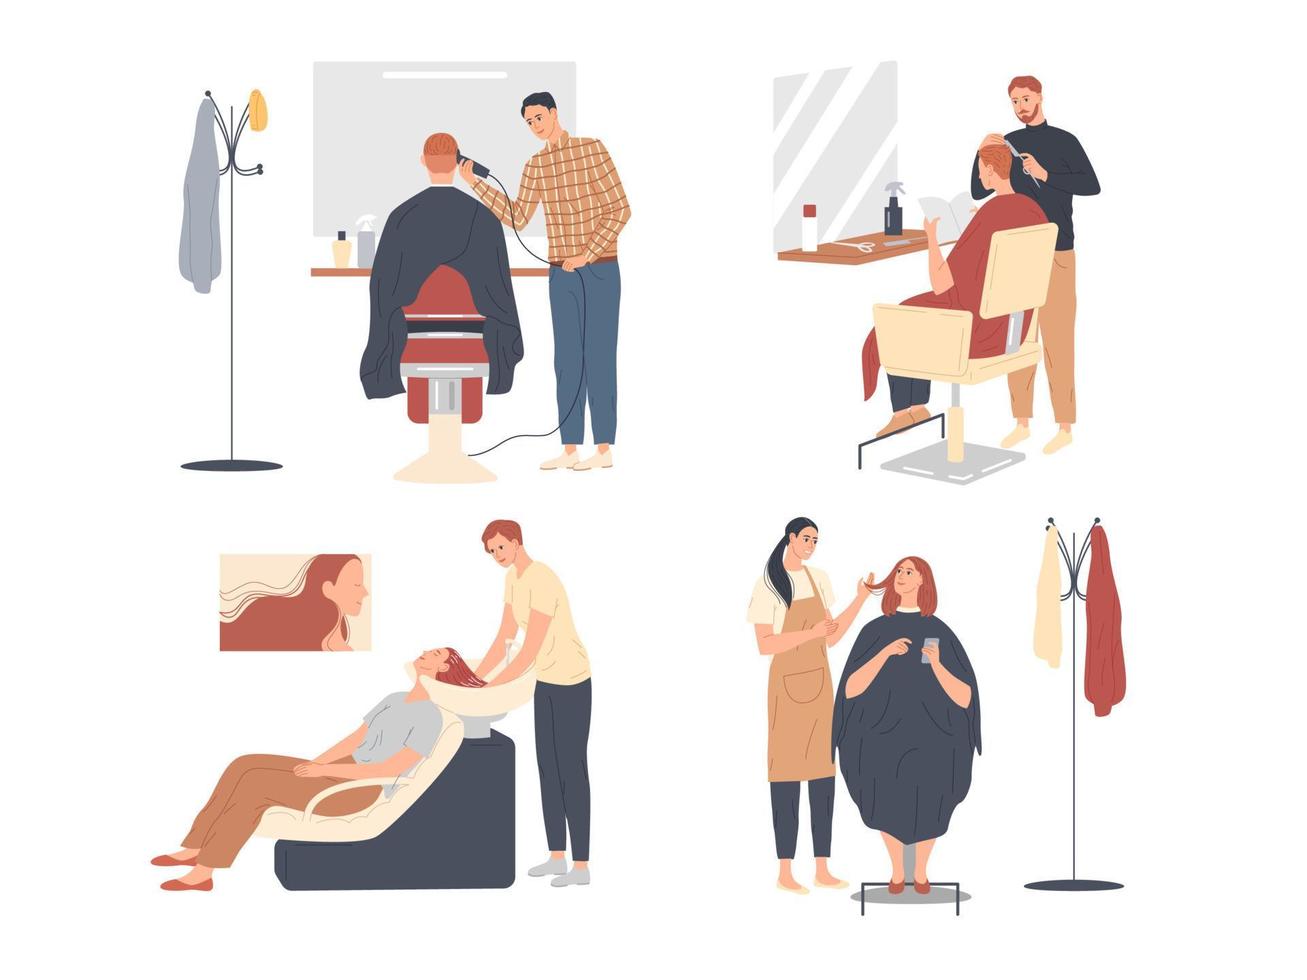 Customer service in the hairdressing salon. Men barbers and women stylists at work, they do haircuts vector